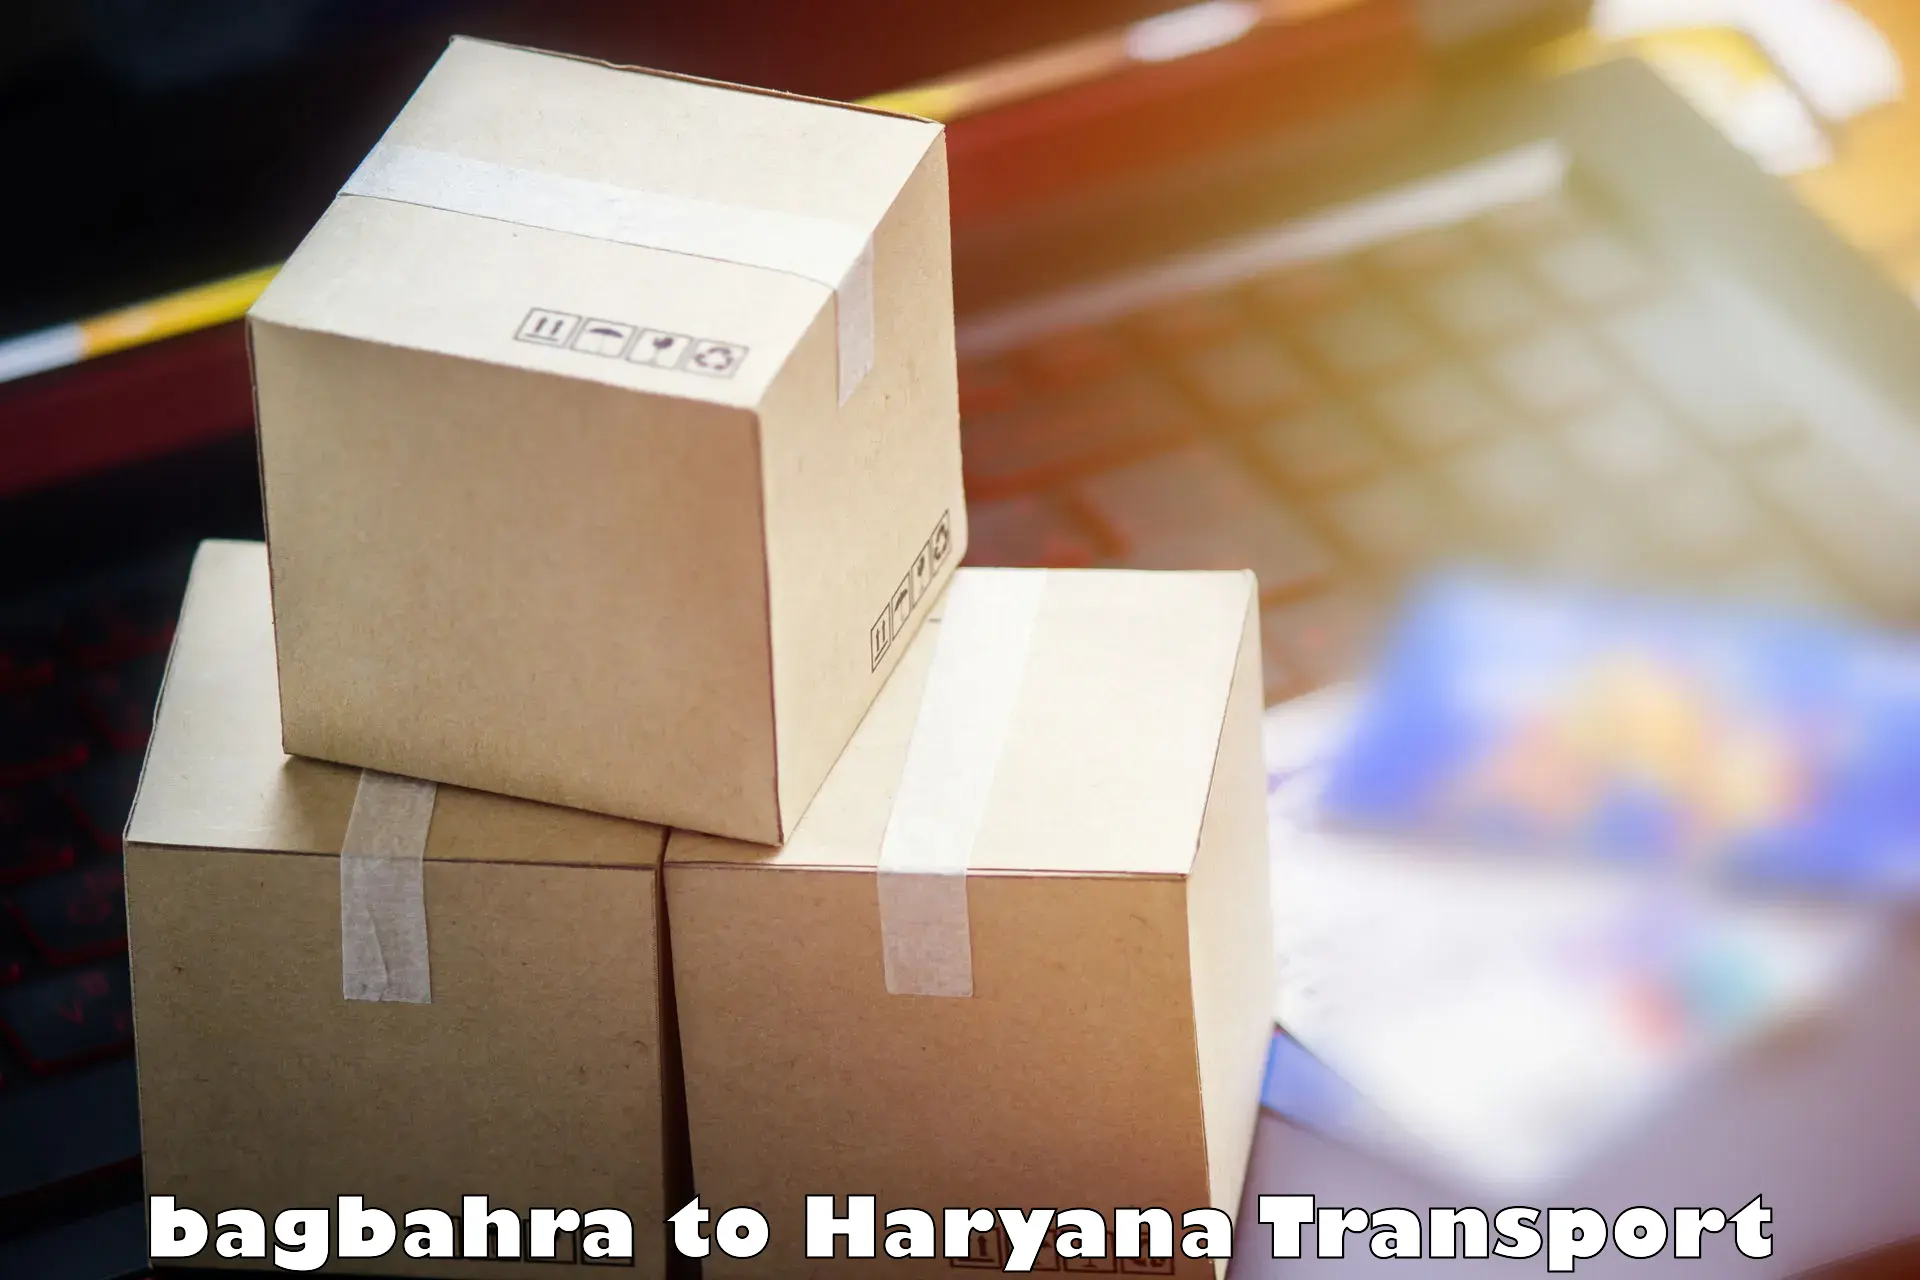 Shipping partner bagbahra to Nuh